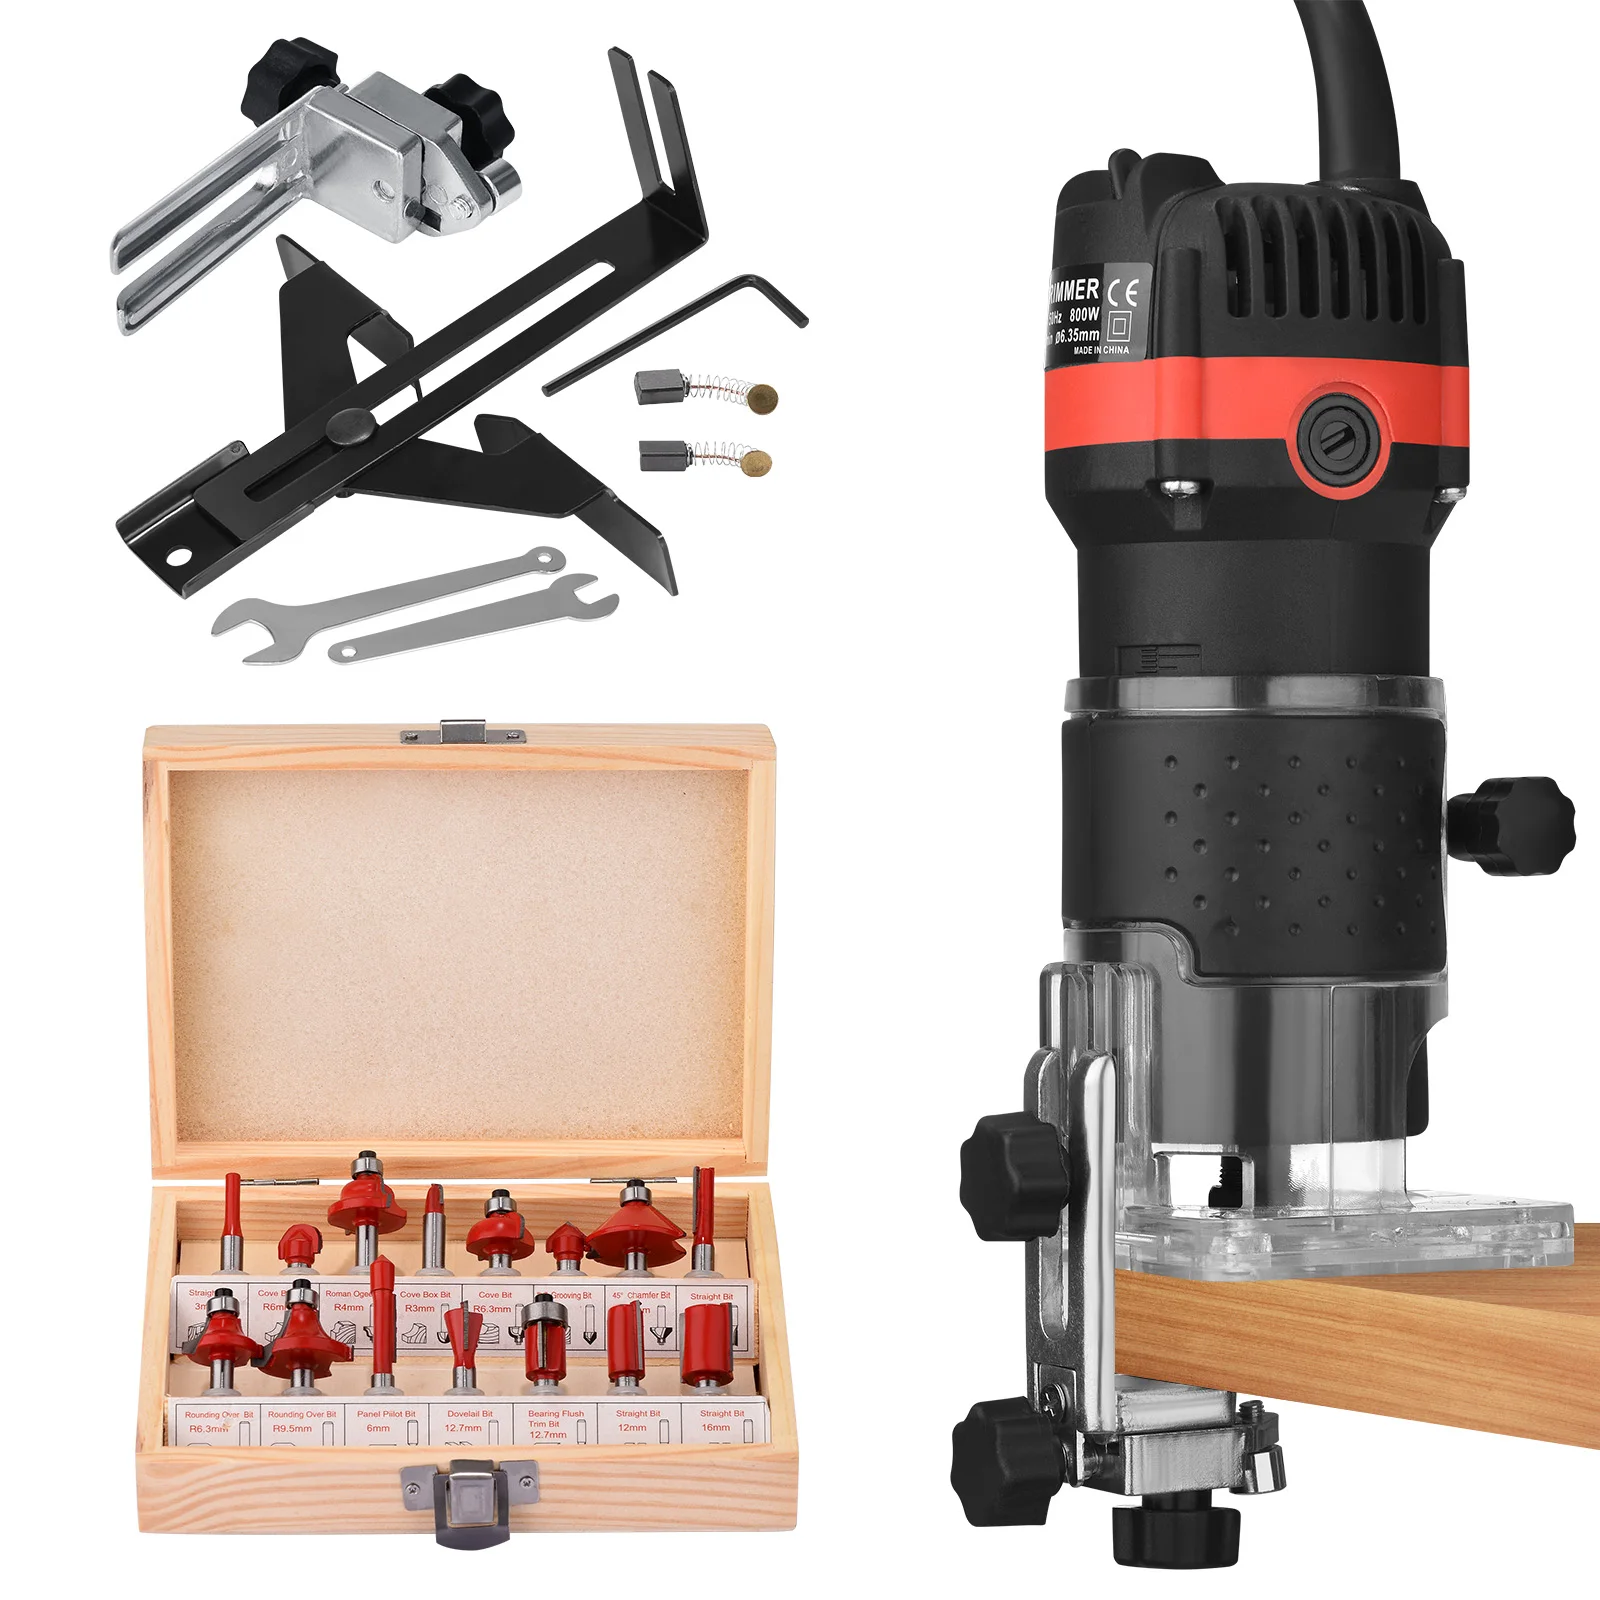 Wood Router Machine Woodworking Electric Trimmer With 15 Milling Cutter Sets Wood Trimmer Slotting,Arc Trimming,Process Carving enlarge